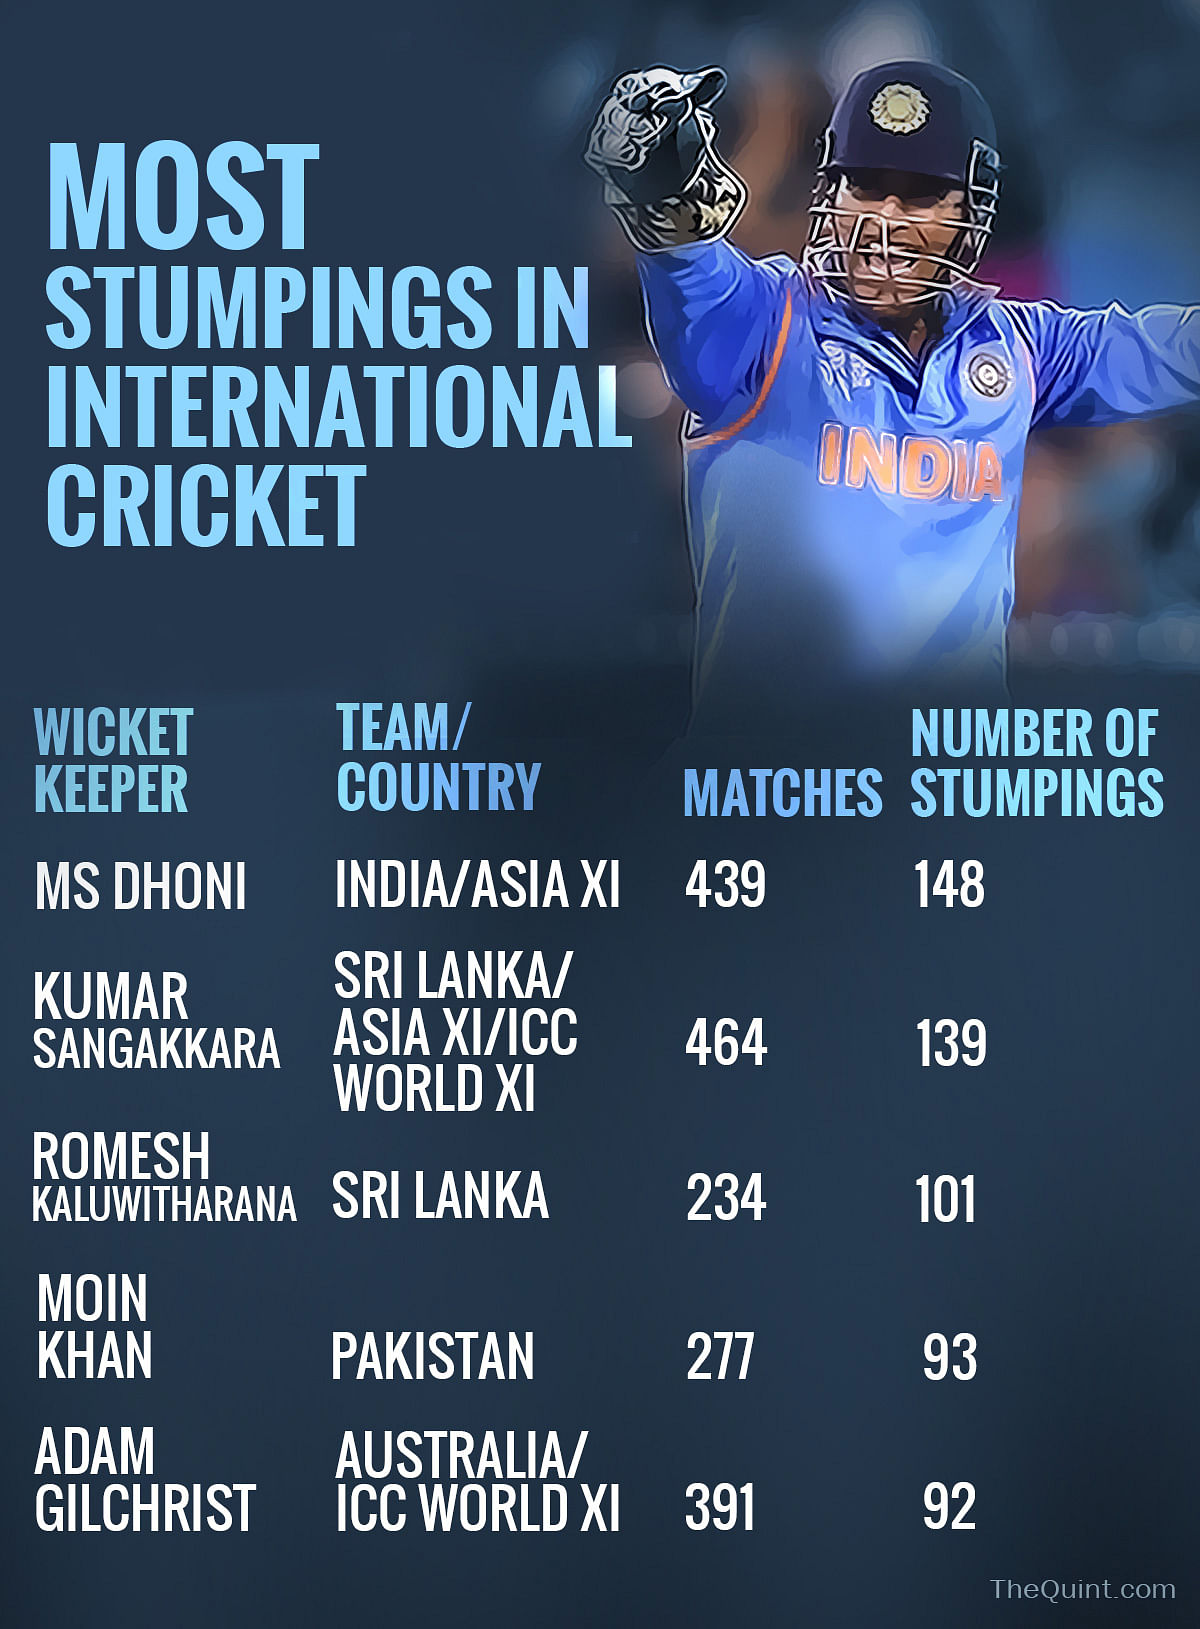 The Quint takes a look at seven interesting records held by MS Dhoni in international cricket on his 35th birthday.